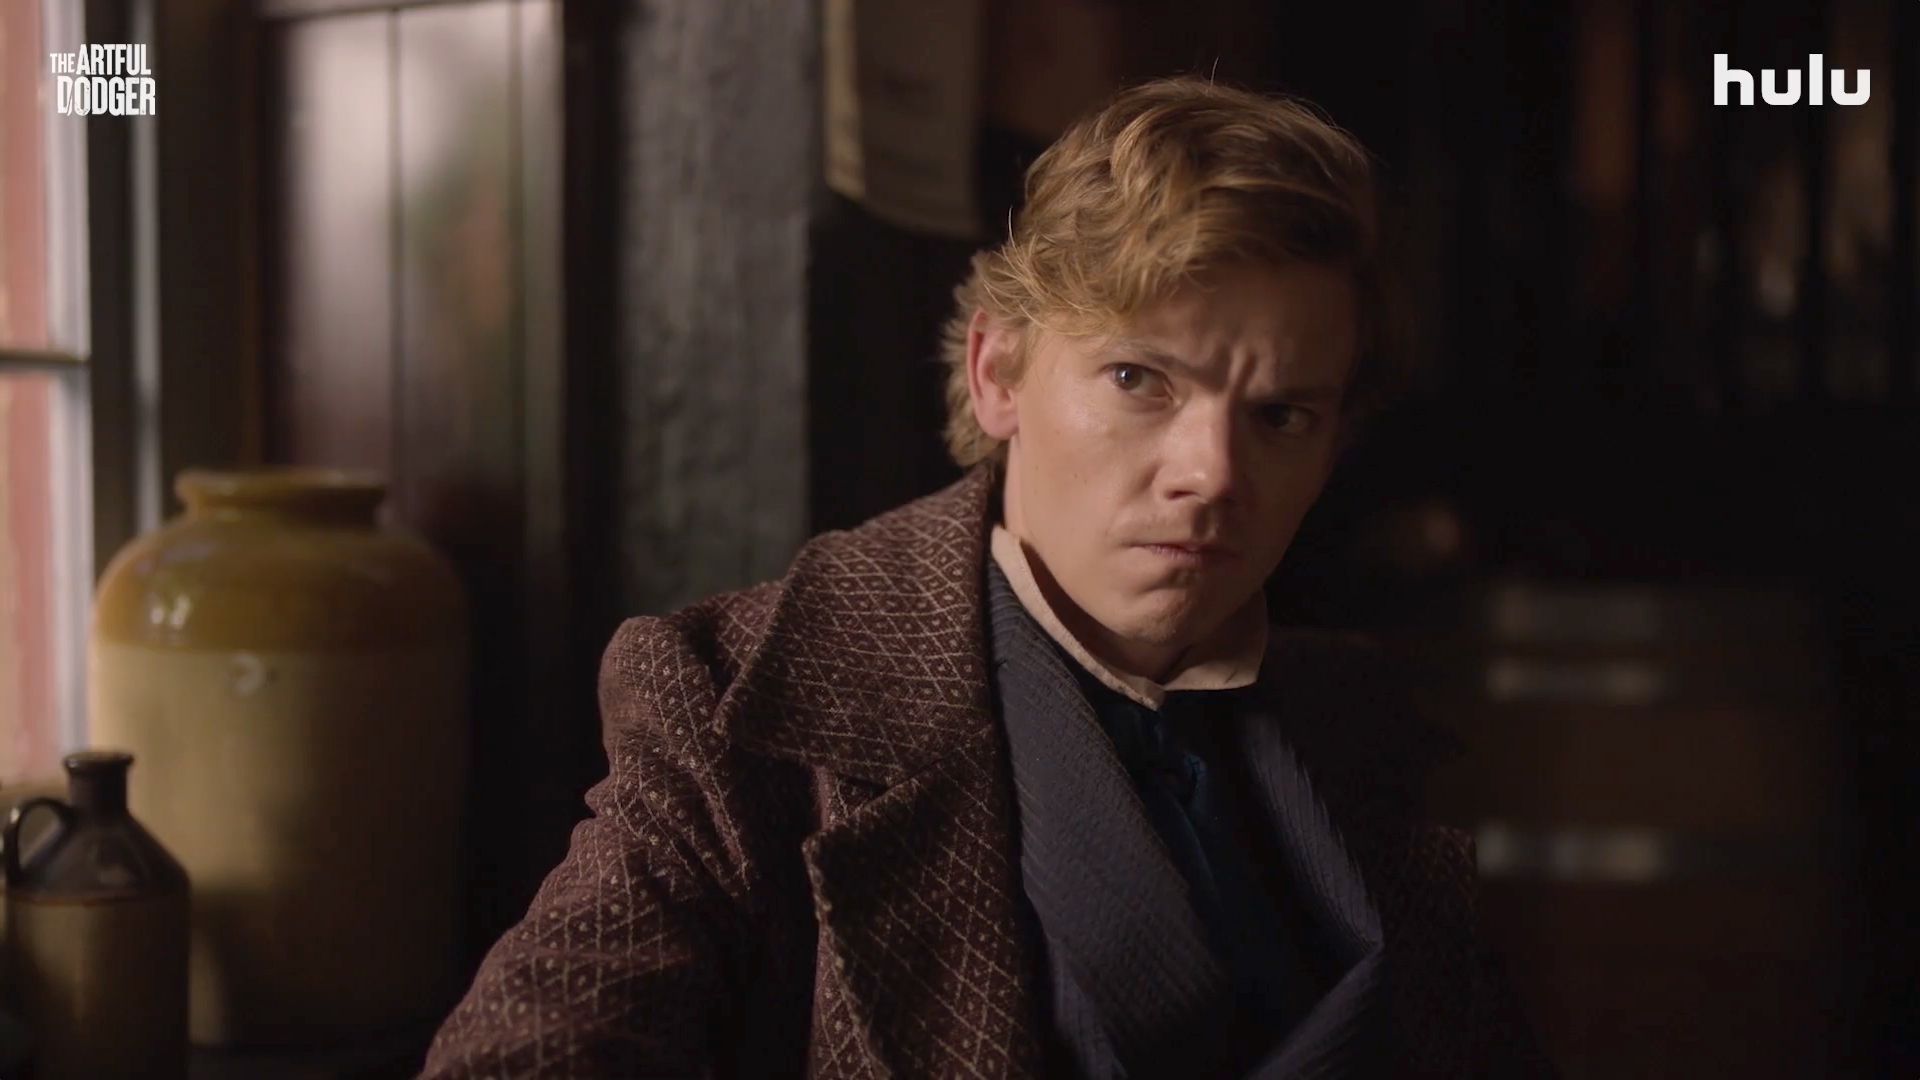 Game of Thrones star's new Artful Dodger series gets first look